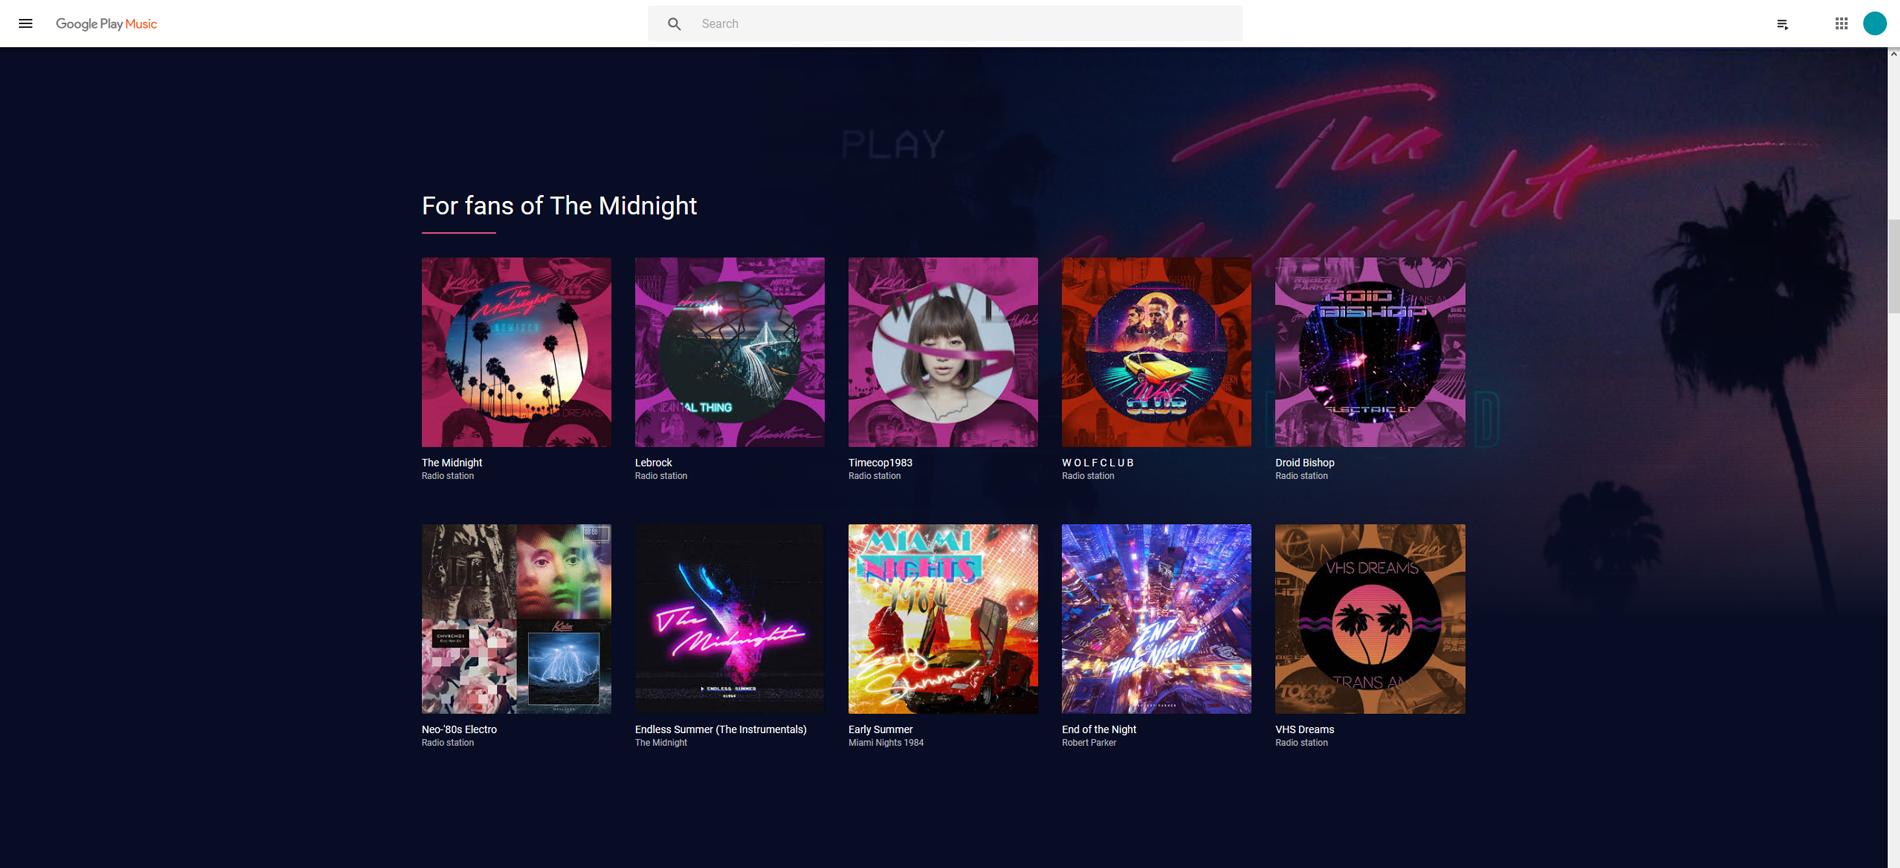 A screenshot of the suggestion screen of Google Play Music on desktop.